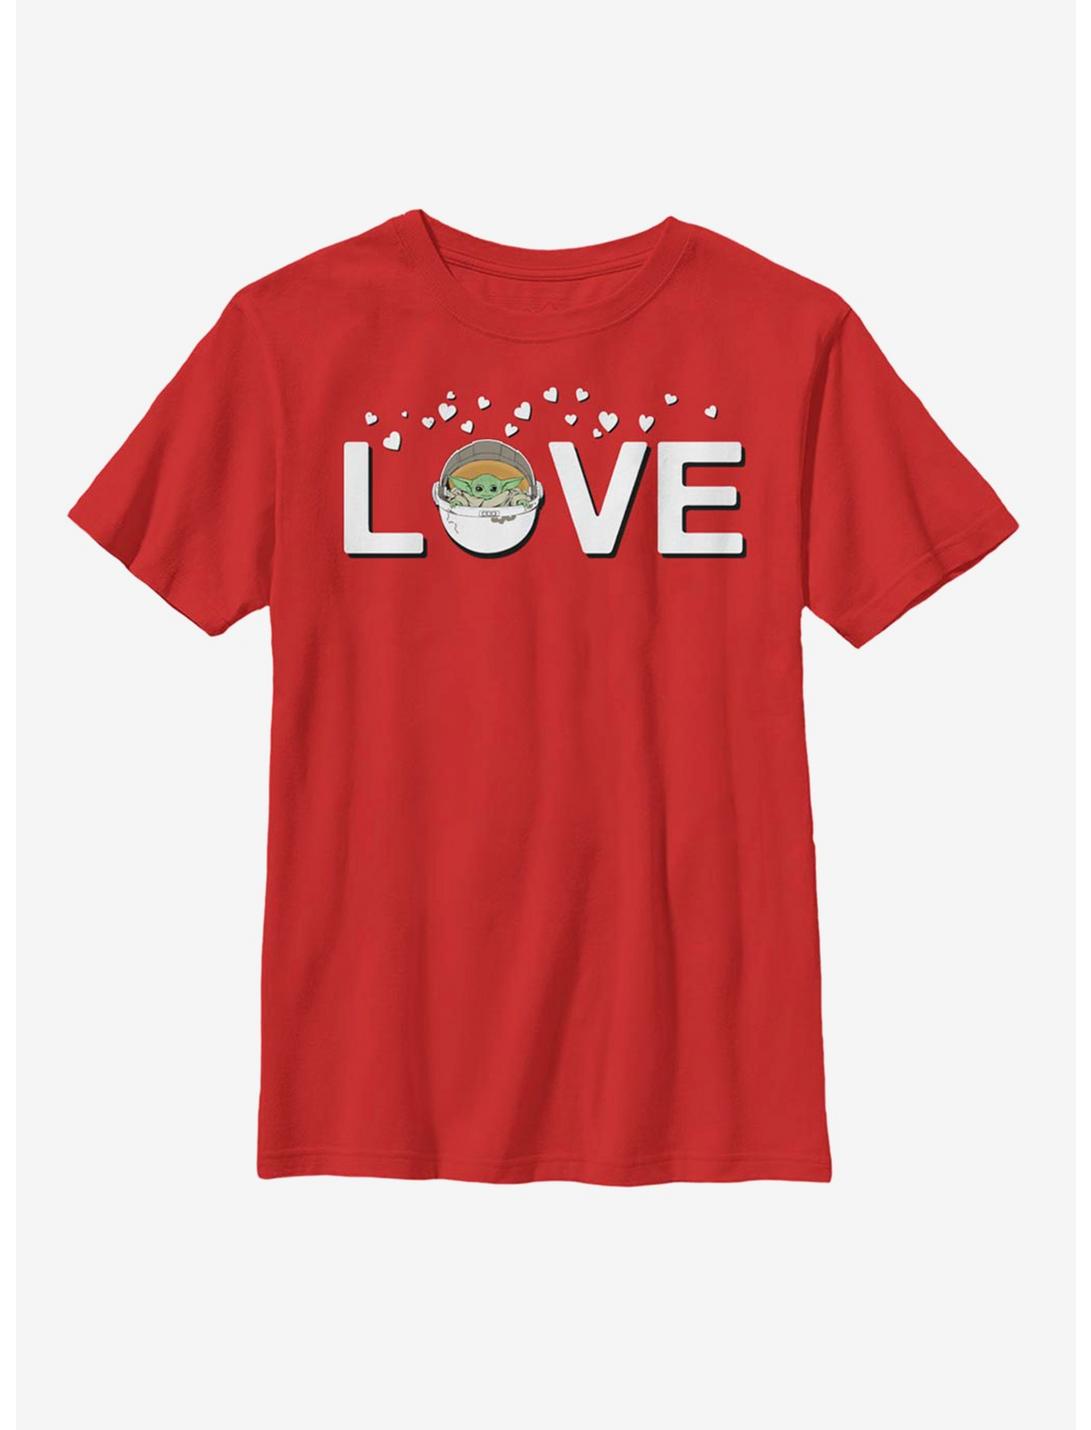 Star Wars The Mandalorian The Child Love Youth T-Shirt, RED, hi-res